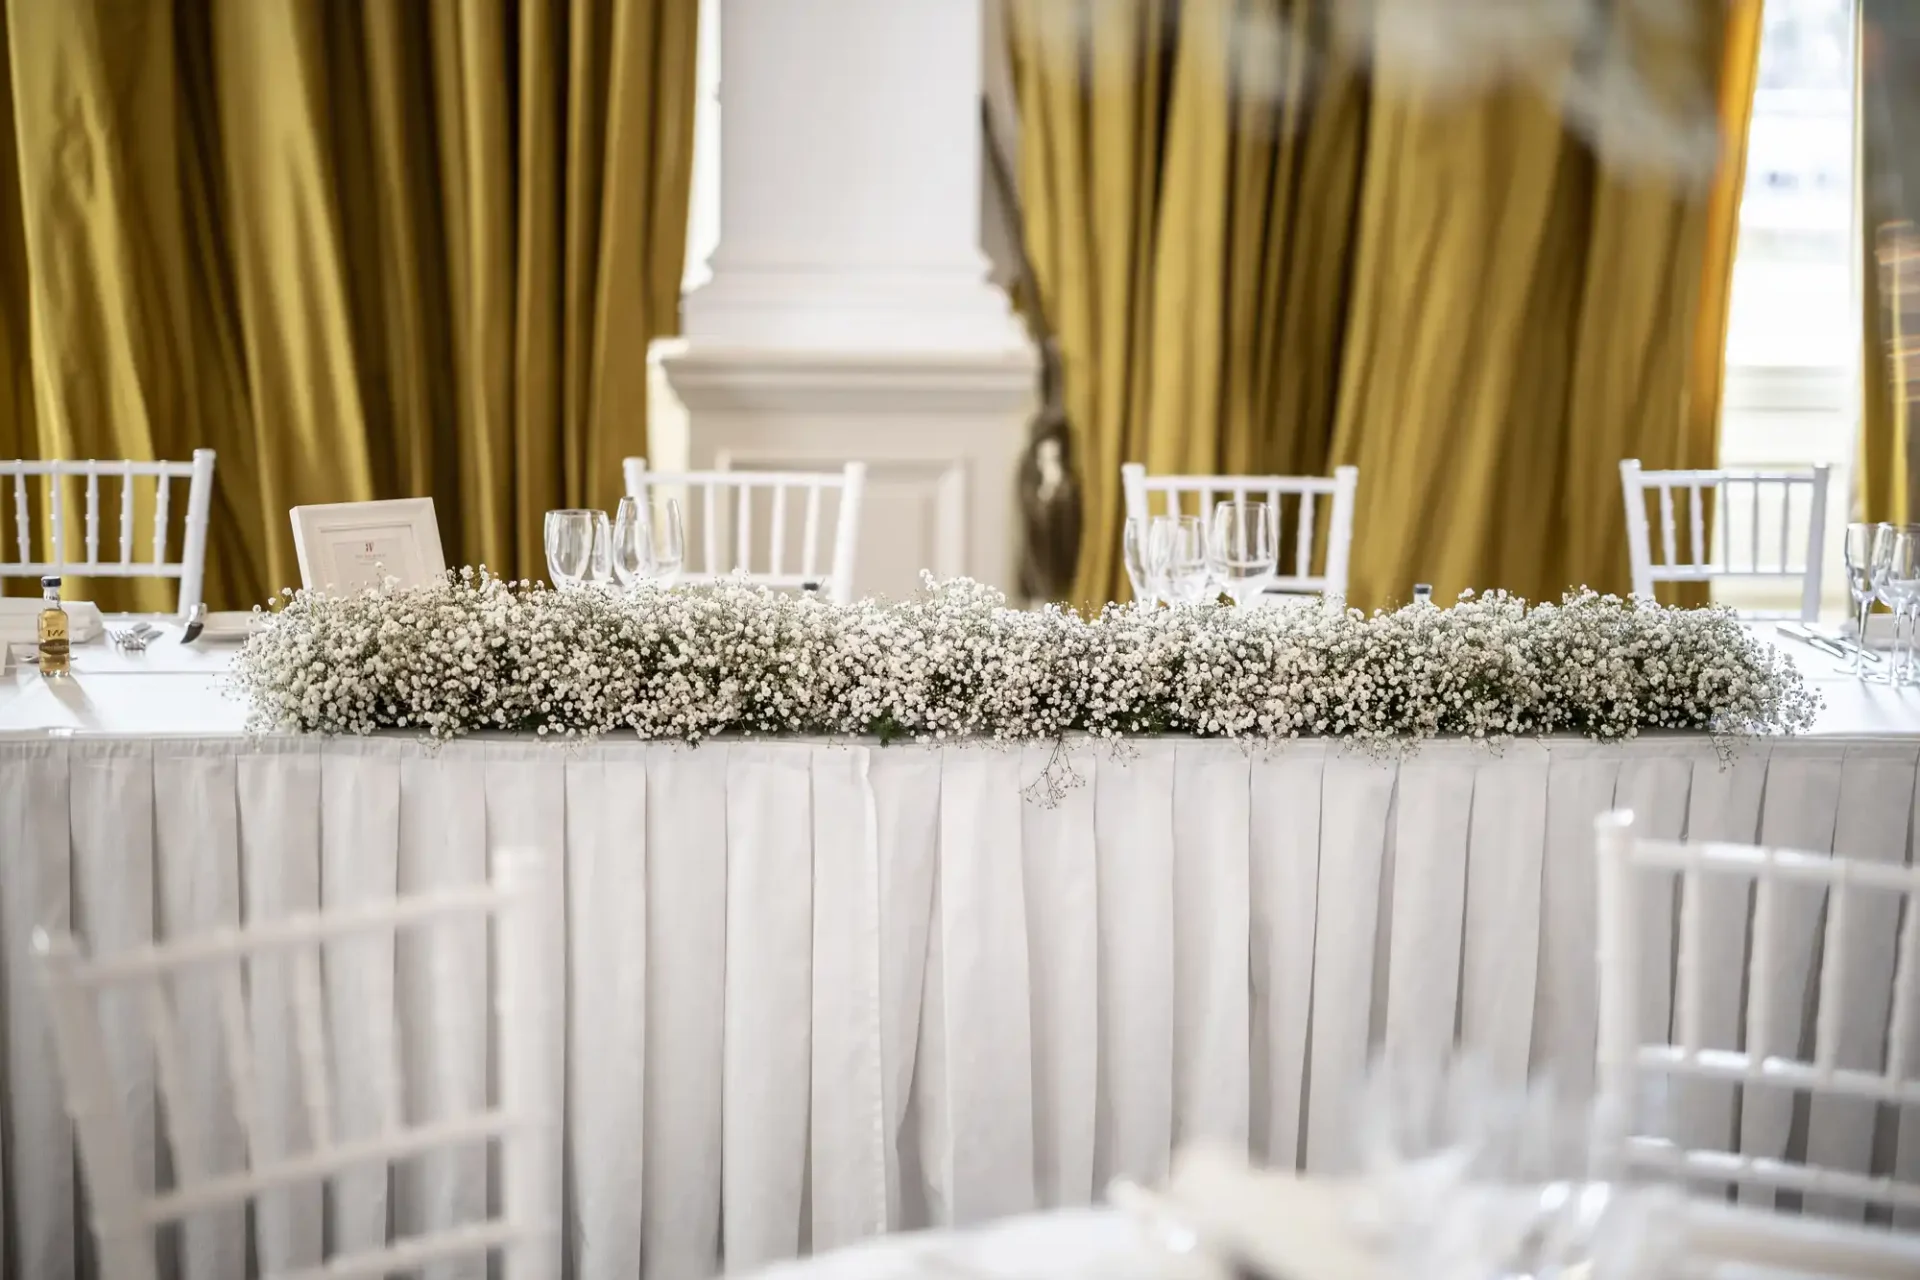 Elegant wedding table setting with white chairs, long floral centerpiece, and golden curtains in a luxurious room.